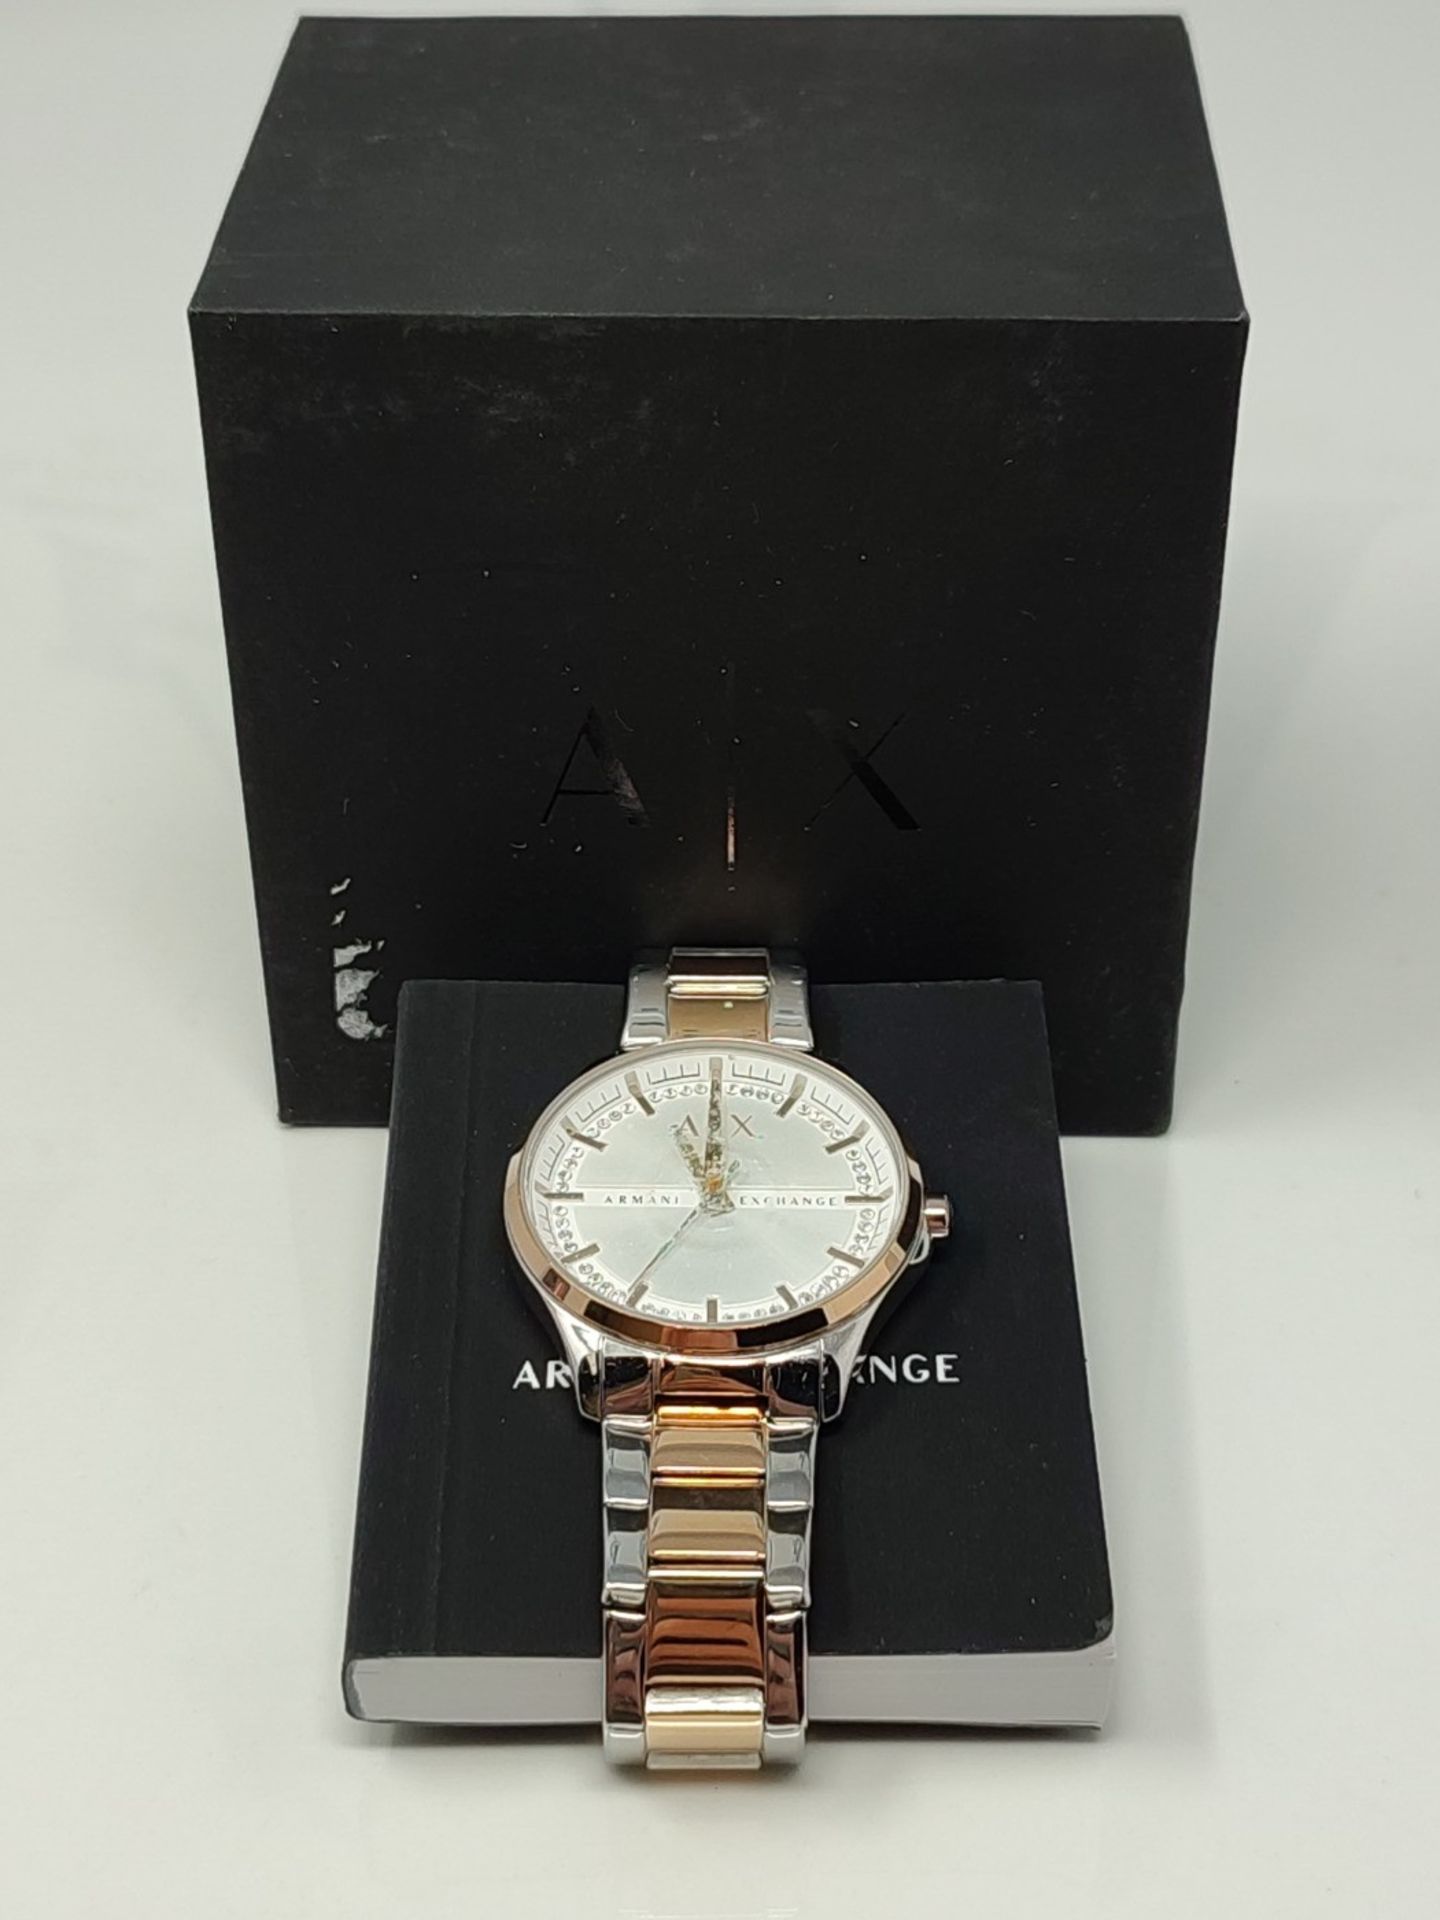 RRP £169.00 Armani Exchange Women's Three-Hand, Stainless Steel Watch,36mm case size - Image 2 of 3